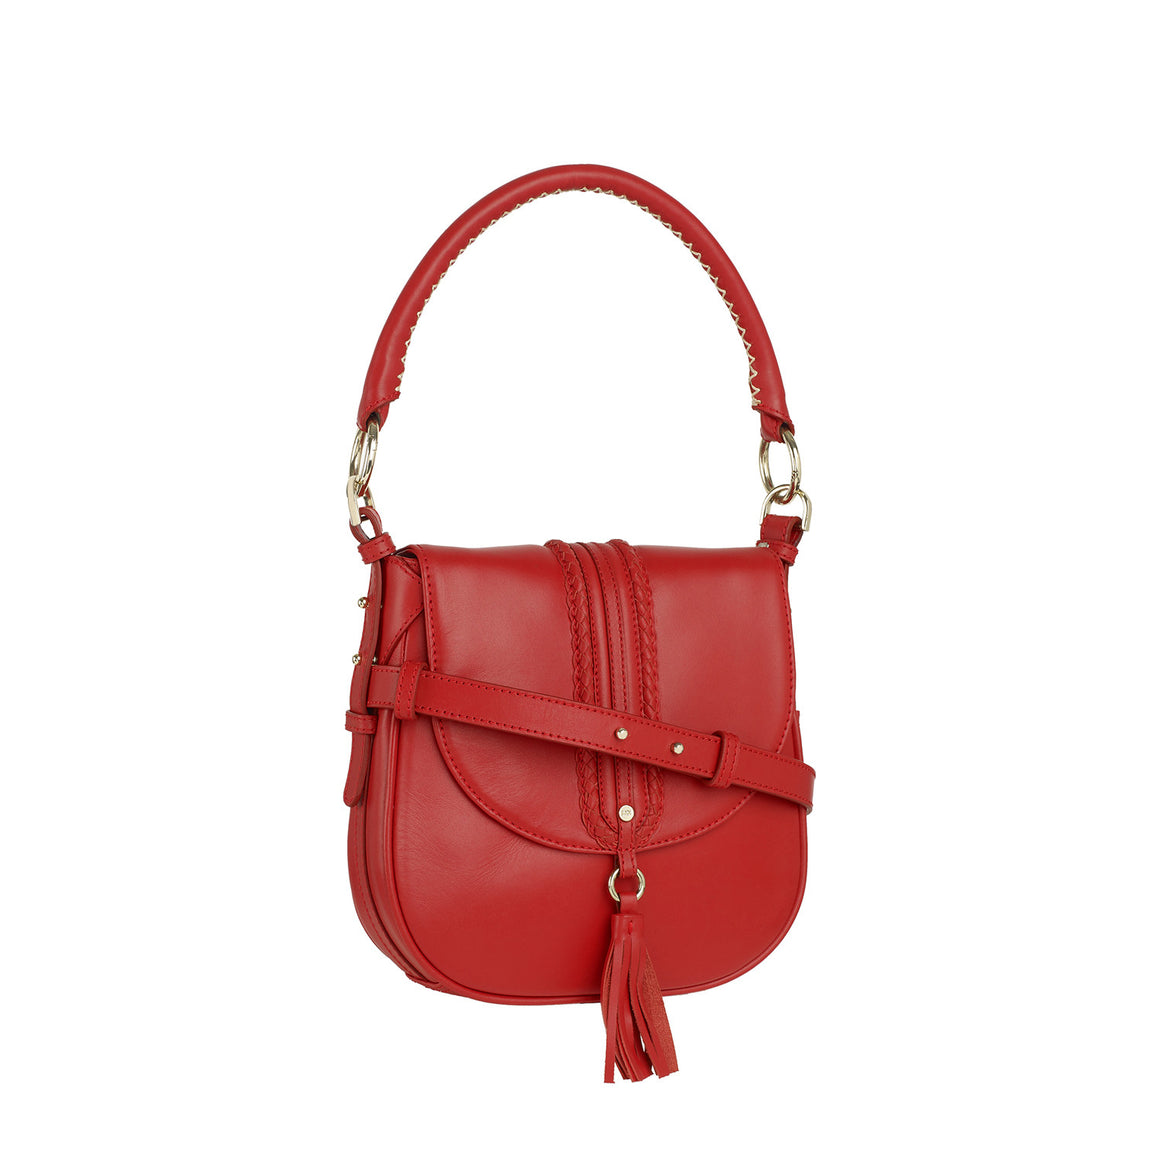 GYPSY ROSE WOMEN'S HAND BAG - SPICE RED